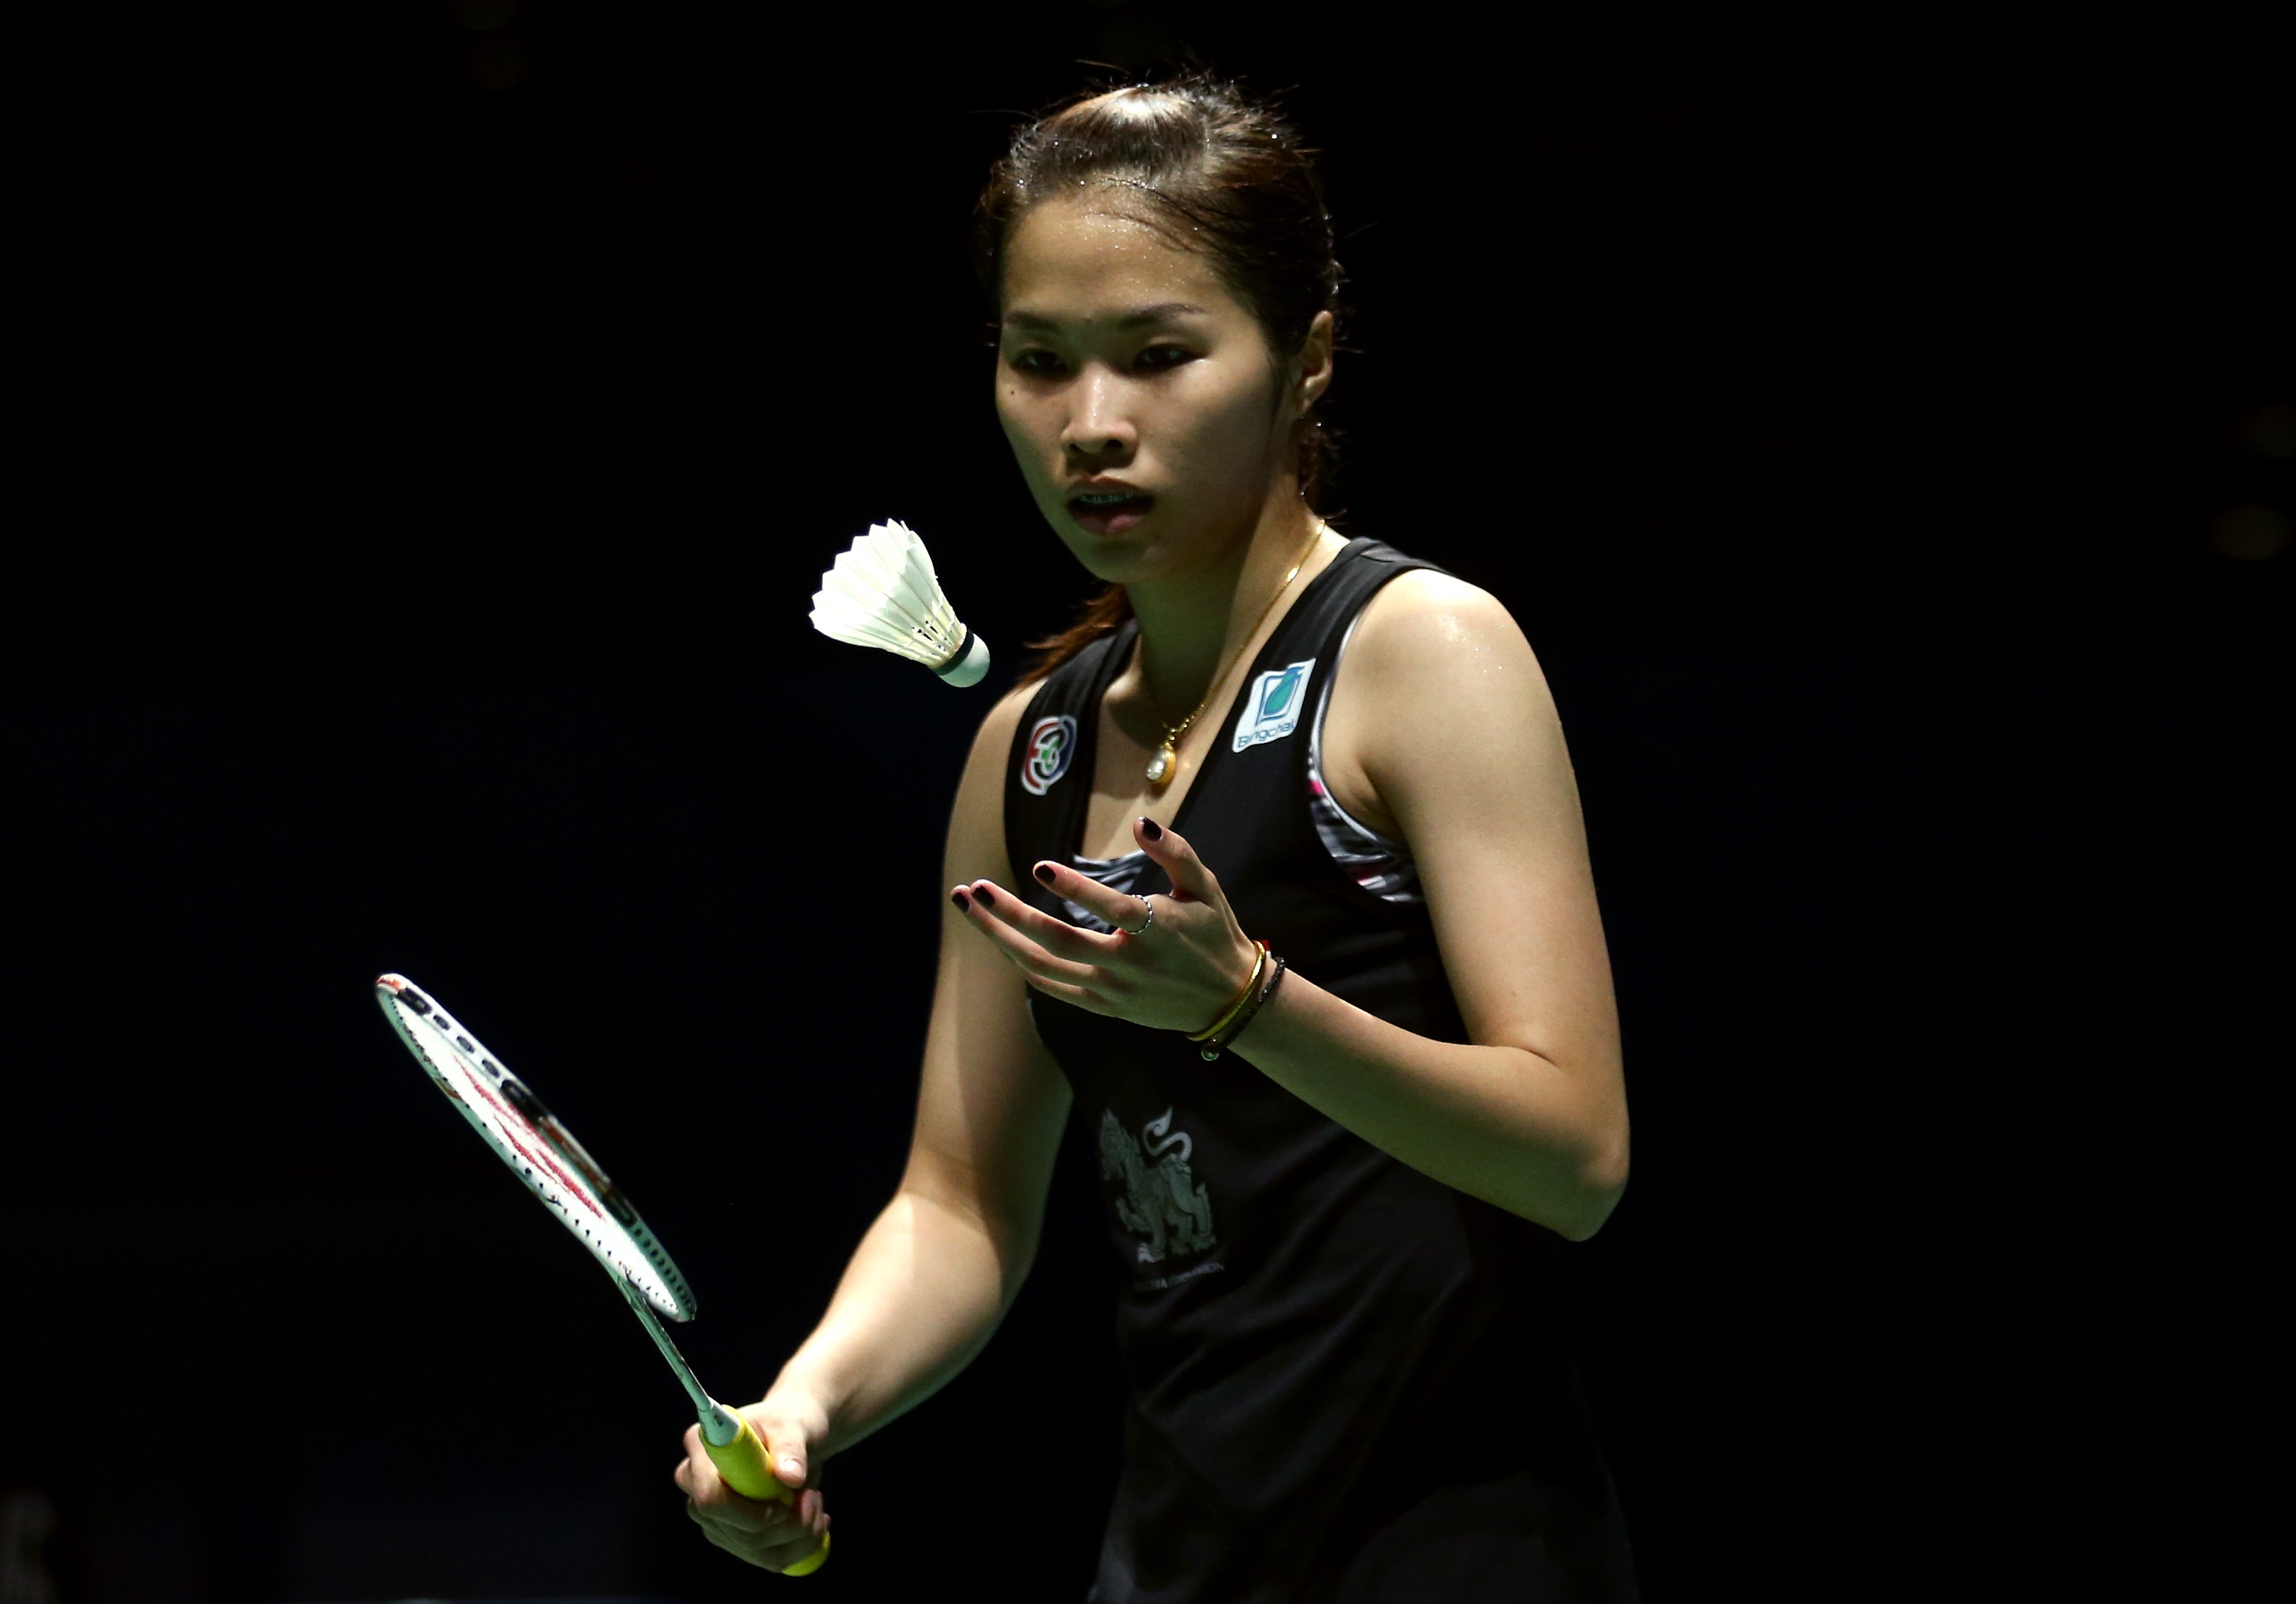 I expect too much from myself playing against Saina, reveals Ratchanok Intanon